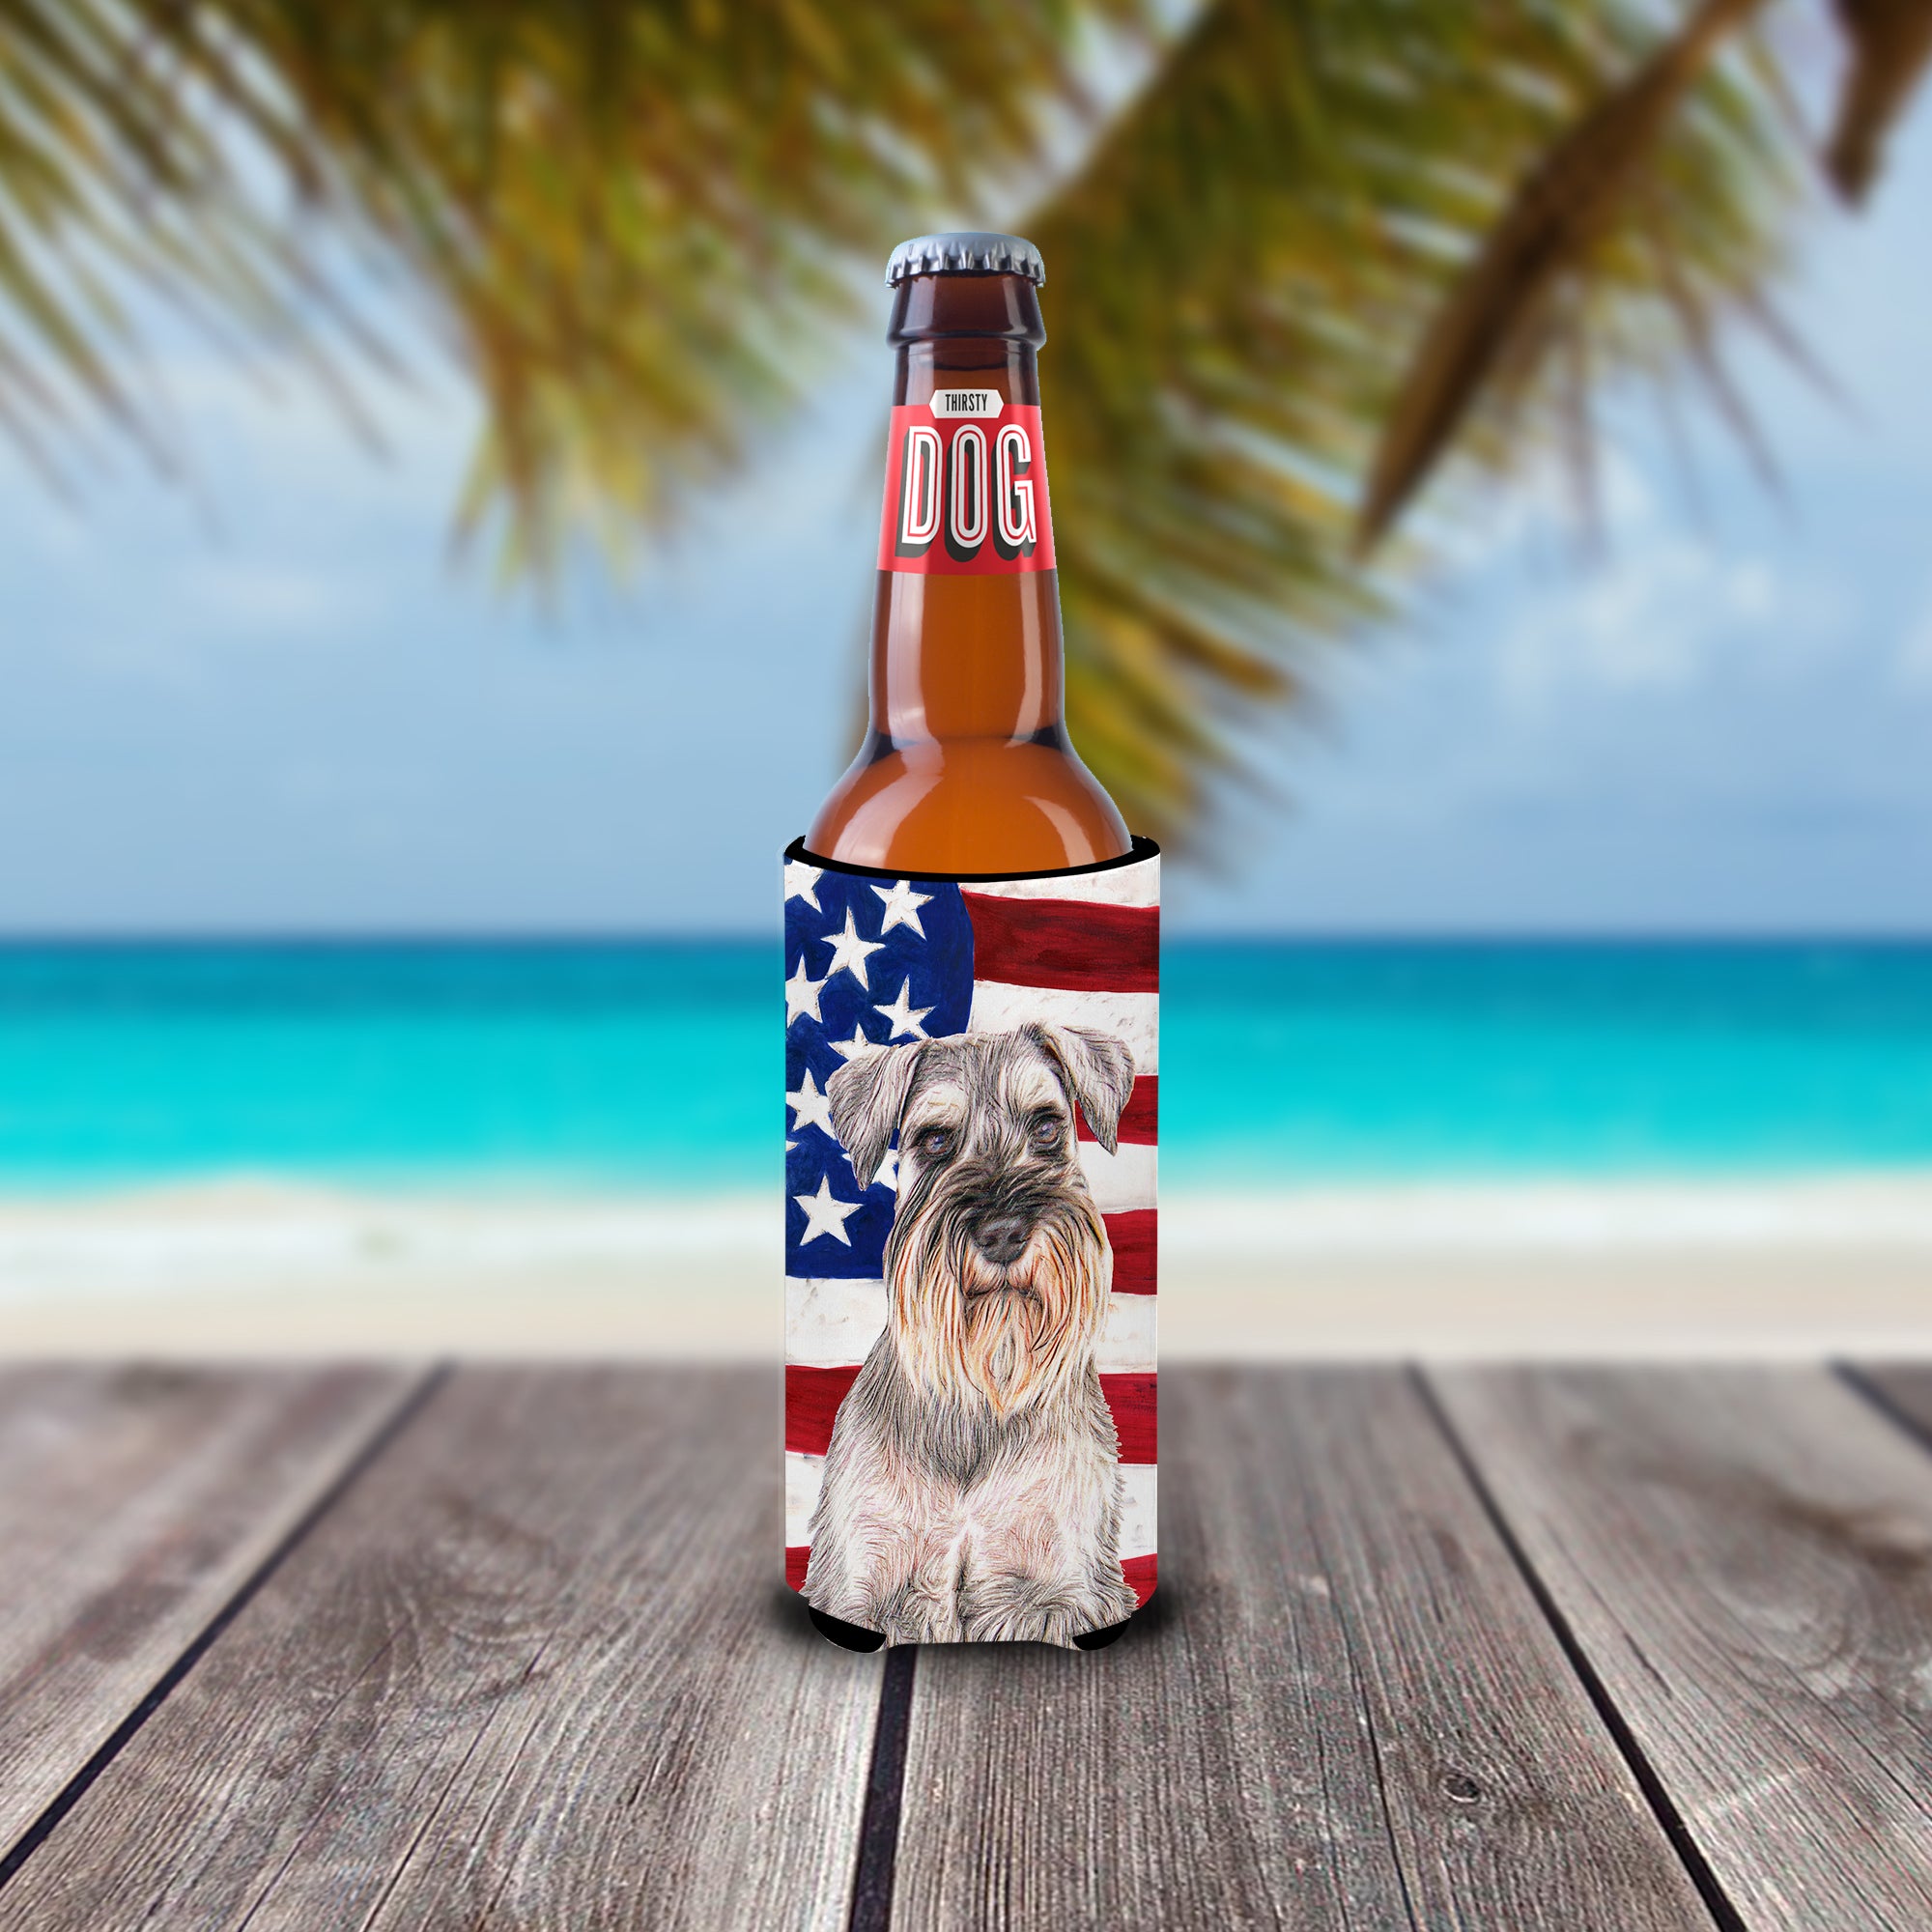 USA American Flag with Schnauzer Ultra Beverage Insulators for slim cans KJ1158MUK